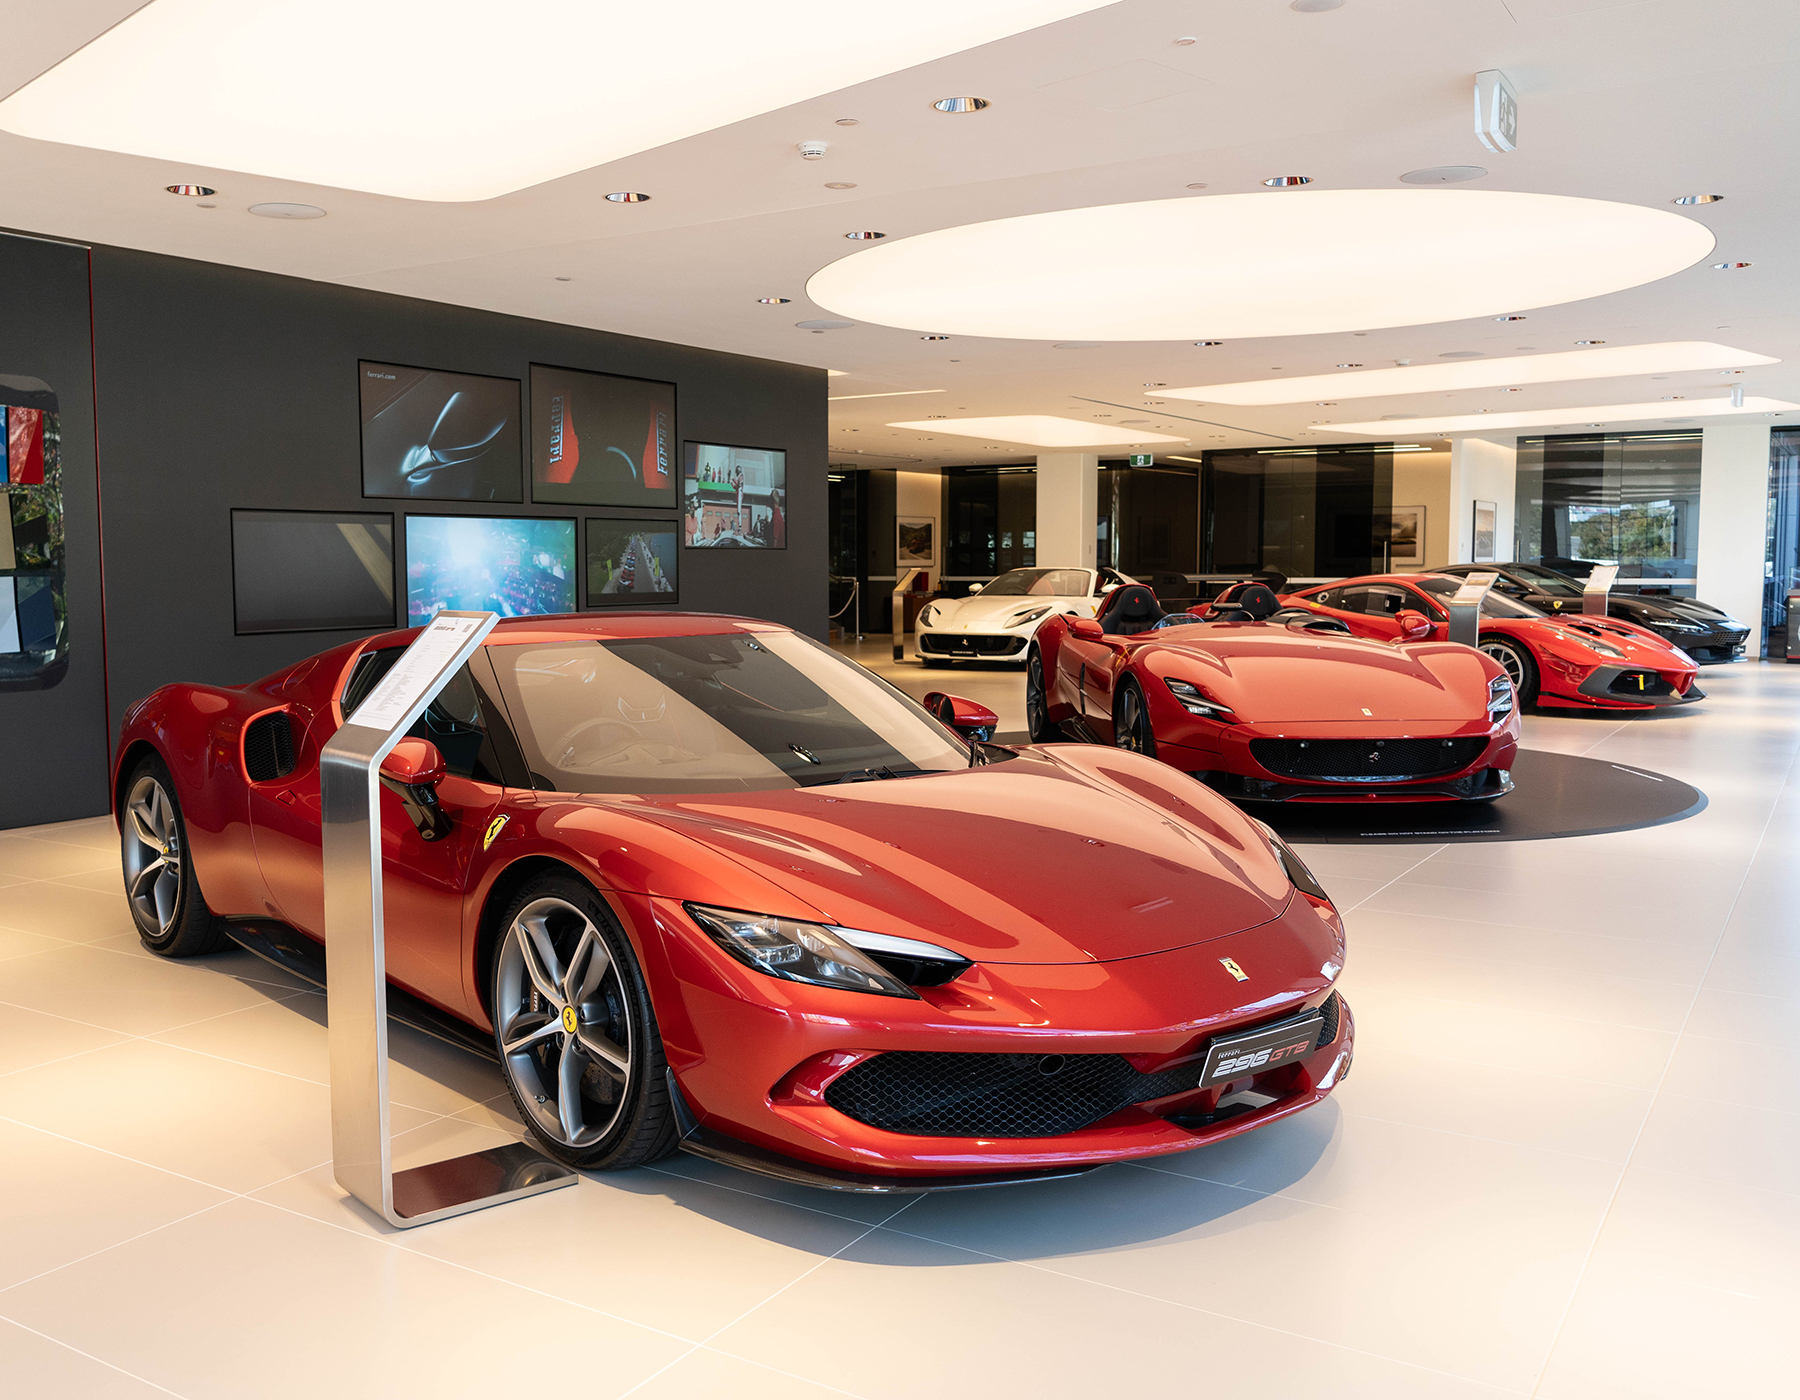 Ferrari Showroom featuring iGuzzini Reflex Downlights, Easy Downlighhts and Underscore 15. Products imported and supplied by Studio 100 JBW